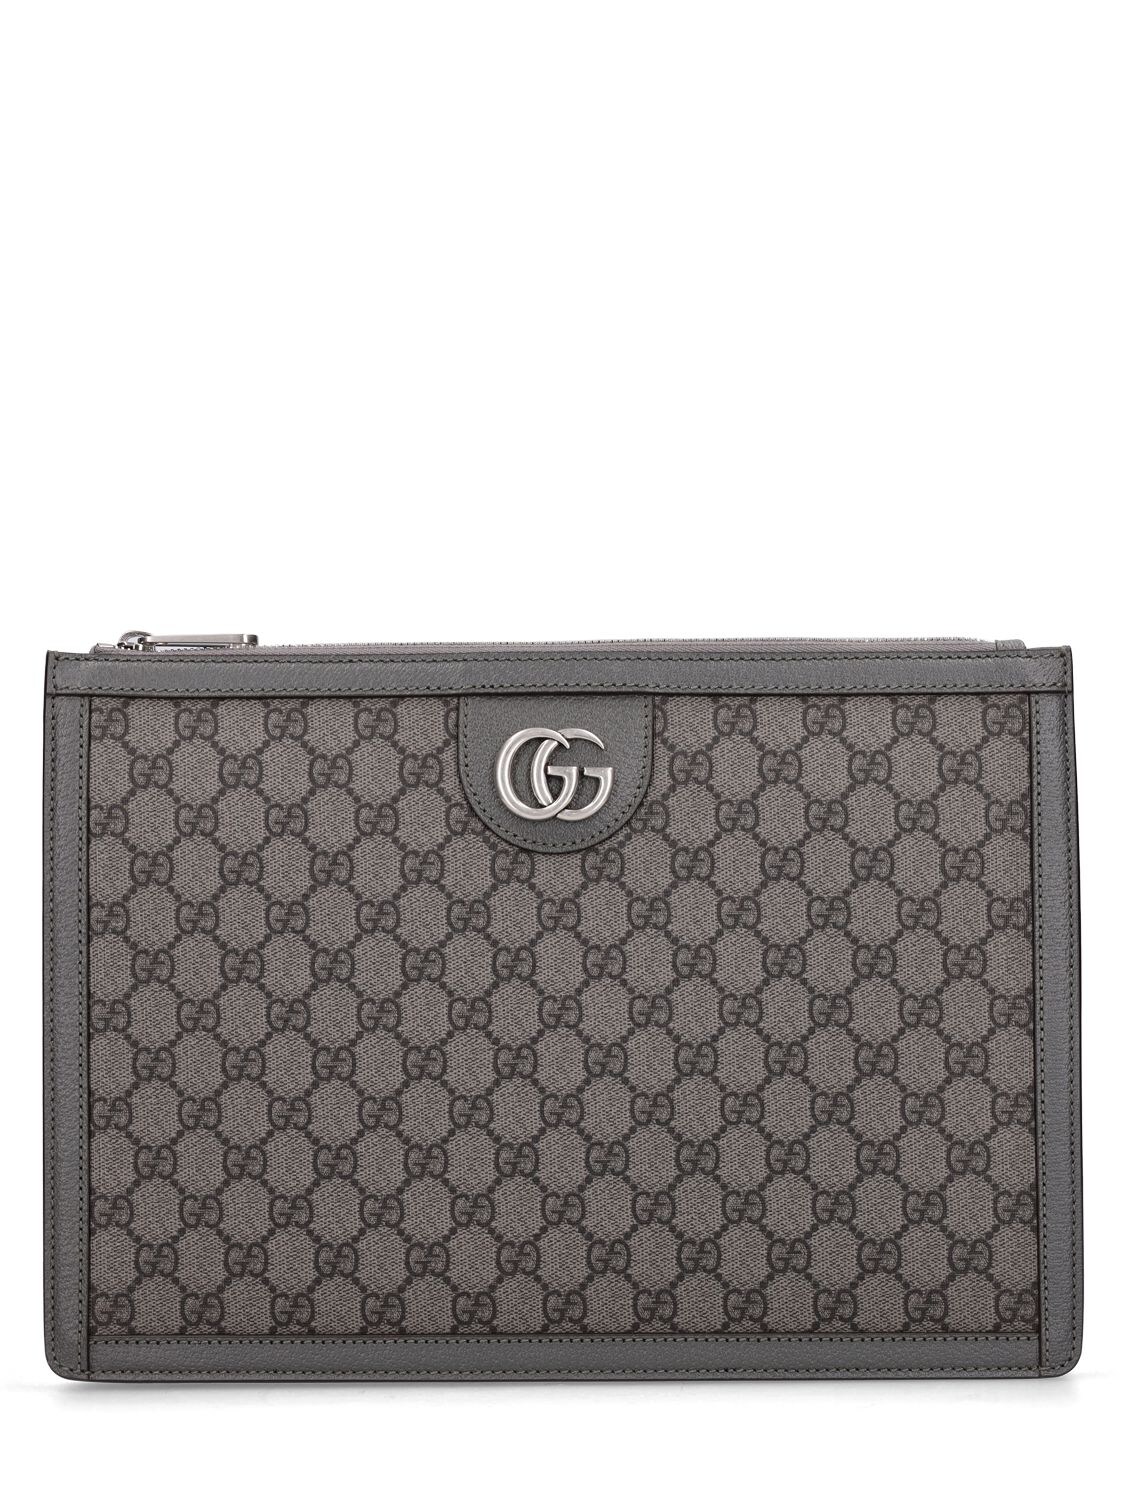 GUCCI Ophidia Gg Canvas Pouch